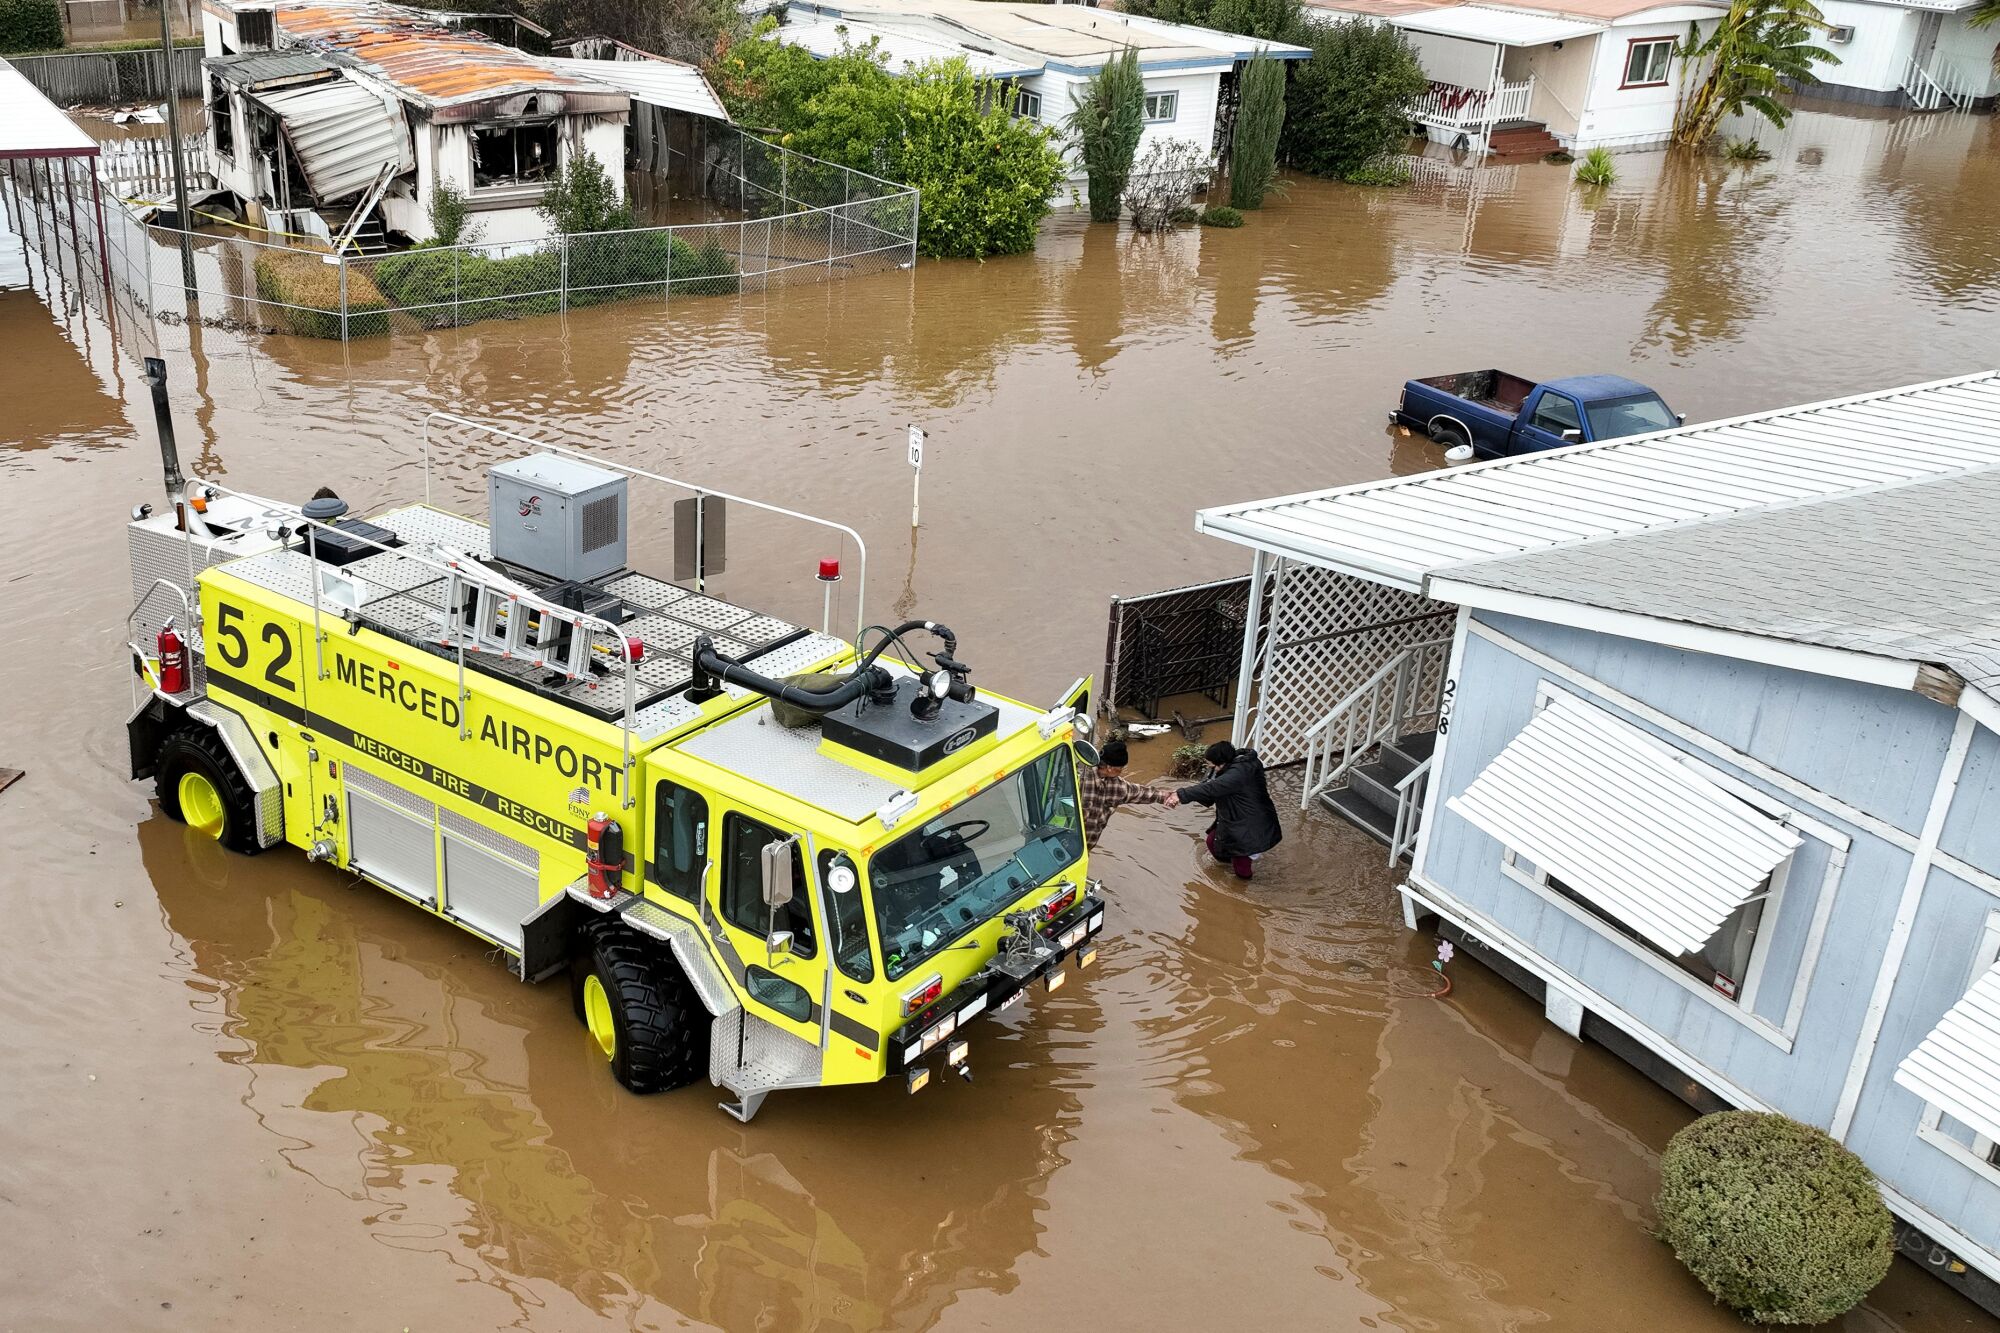 A rescue crew assists a stranded resident in a flooded neighborhood.